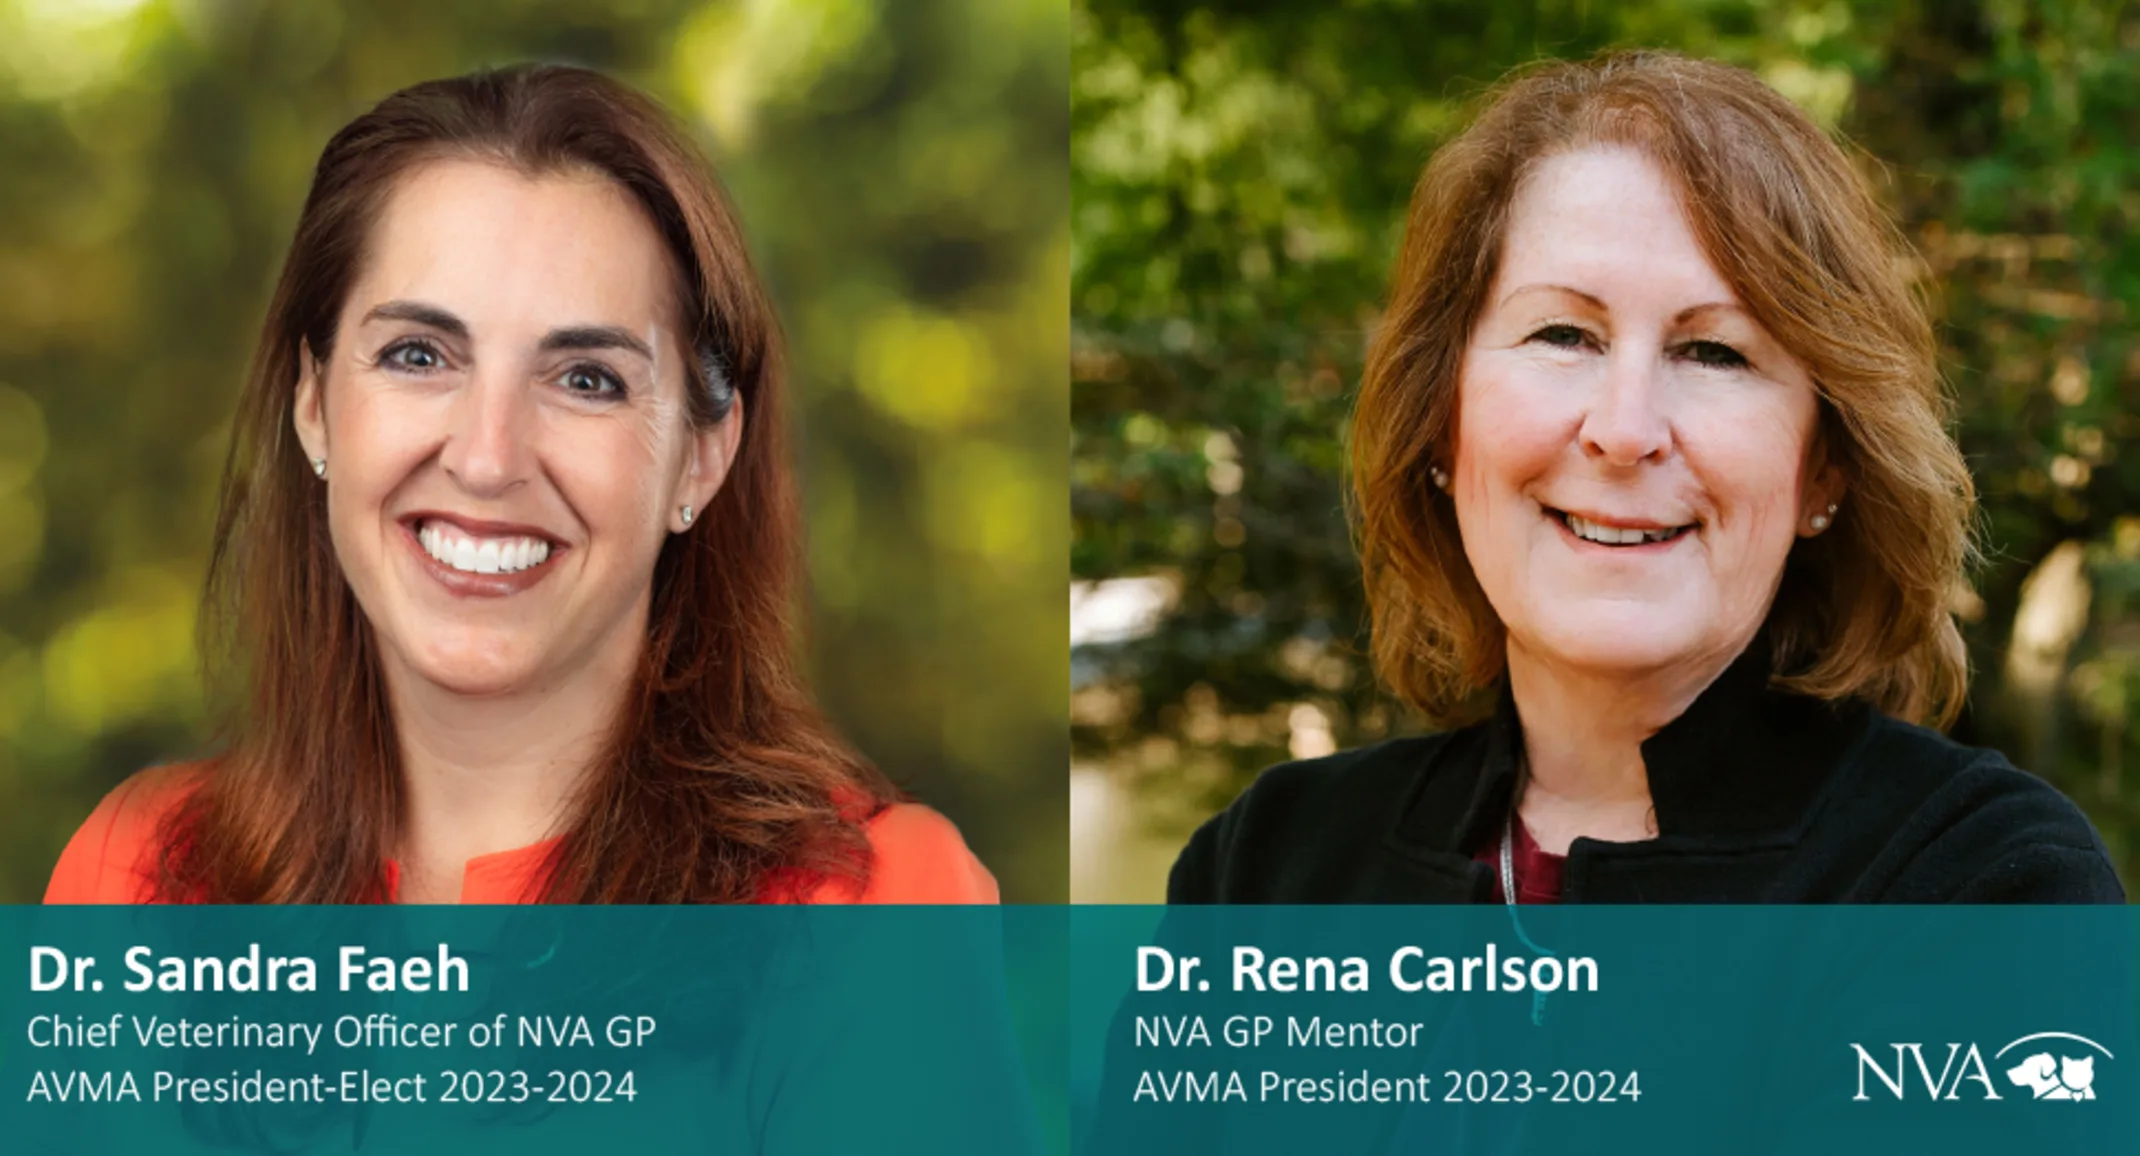 Dr. Sandra Faeh and Dr. Rena Carlson with NVA logo with green background